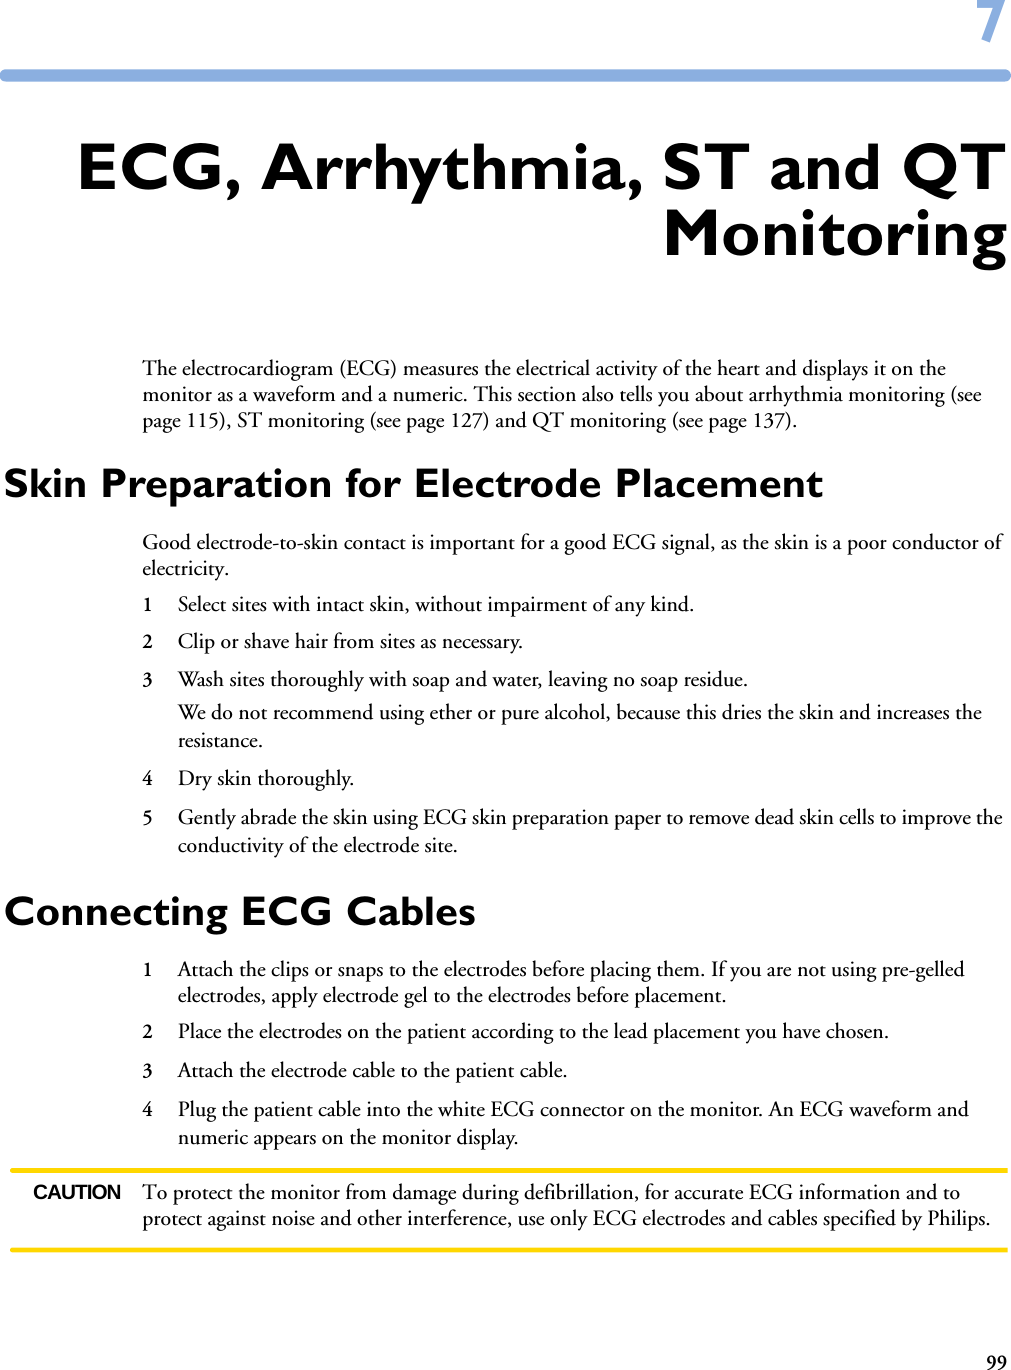 9977ECG, Arrhythmia, ST and QTMonitoringThe electrocardiogram (ECG) measures the electrical activity of the heart and displays it on the monitor as a waveform and a numeric. This section also tells you about arrhythmia monitoring (see page 115), ST monitoring (see page 127) and QT monitoring (see page 137).Skin Preparation for Electrode PlacementGood electrode-to-skin contact is important for a good ECG signal, as the skin is a poor conductor of electricity.1Select sites with intact skin, without impairment of any kind.2Clip or shave hair from sites as necessary.3Wash sites thoroughly with soap and water, leaving no soap residue. We do not recommend using ether or pure alcohol, because this dries the skin and increases the resistance.4Dry skin thoroughly.5Gently abrade the skin using ECG skin preparation paper to remove dead skin cells to improve the conductivity of the electrode site.Connecting ECG Cables1Attach the clips or snaps to the electrodes before placing them. If you are not using pre-gelled electrodes, apply electrode gel to the electrodes before placement.2Place the electrodes on the patient according to the lead placement you have chosen. 3Attach the electrode cable to the patient cable.4Plug the patient cable into the white ECG connector on the monitor. An ECG waveform and numeric appears on the monitor display. CAUTION To protect the monitor from damage during defibrillation, for accurate ECG information and to protect against noise and other interference, use only ECG electrodes and cables specified by Philips. 